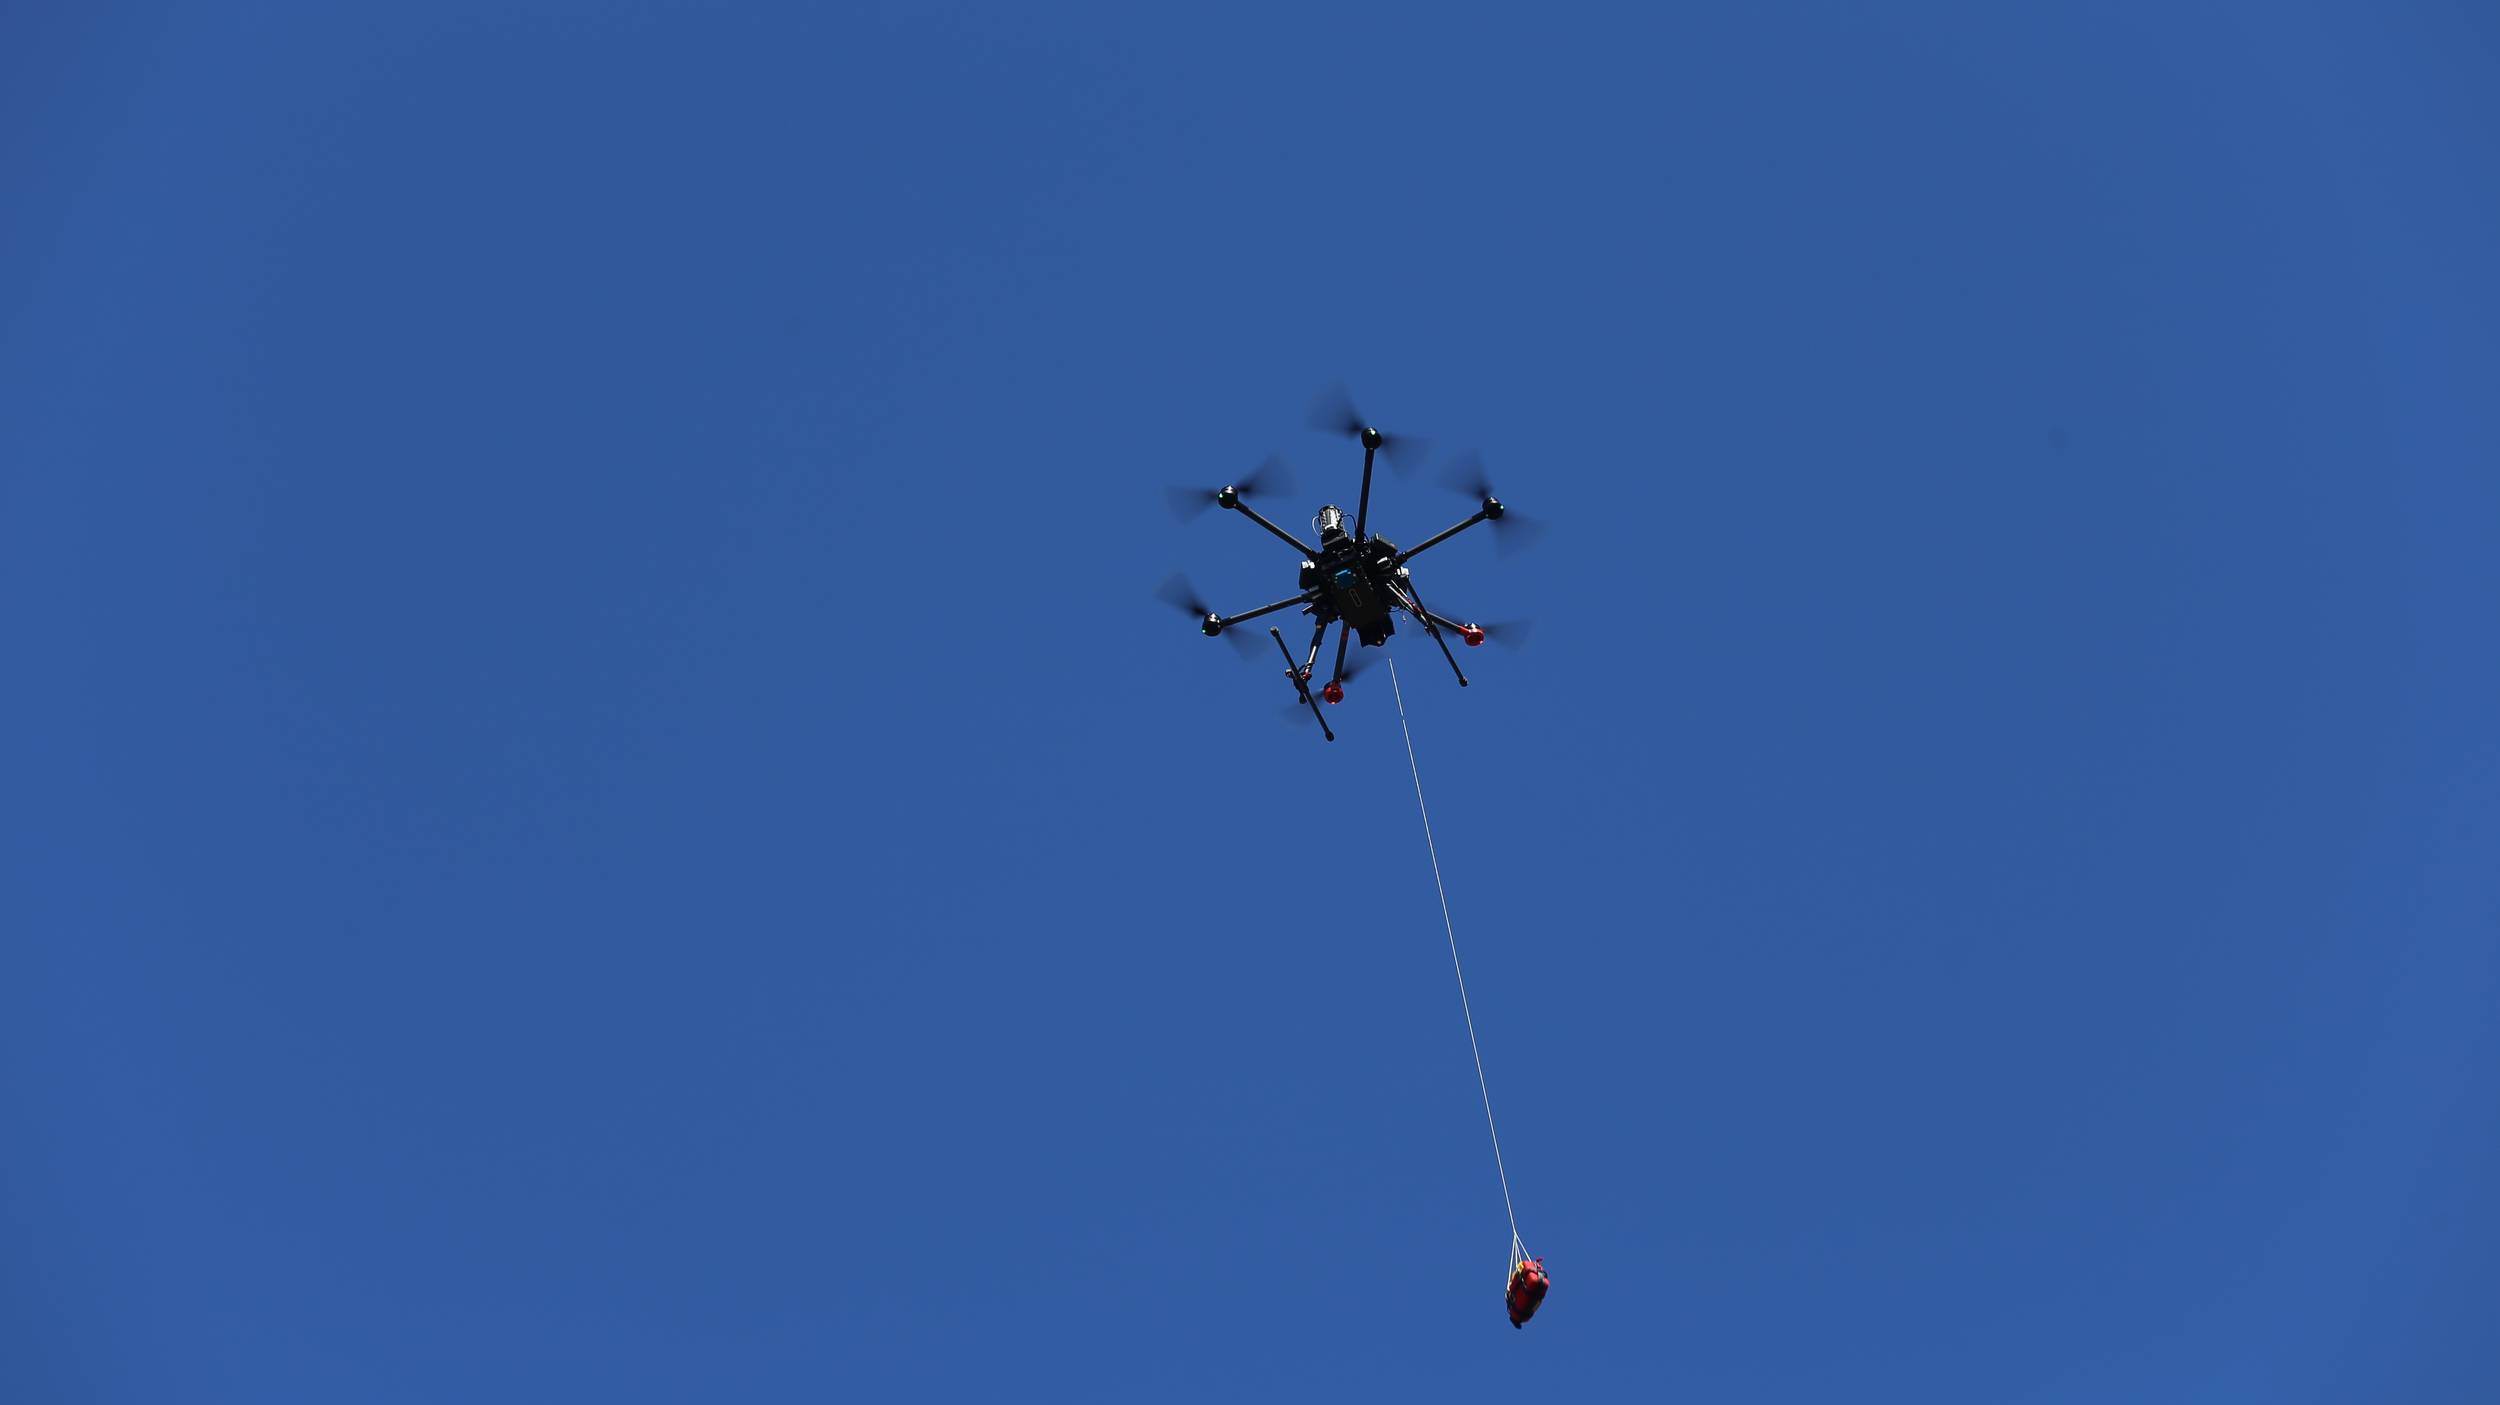 Defibrillator was delivered by an autonomous drone and helped to save the life  | © SCHILLER